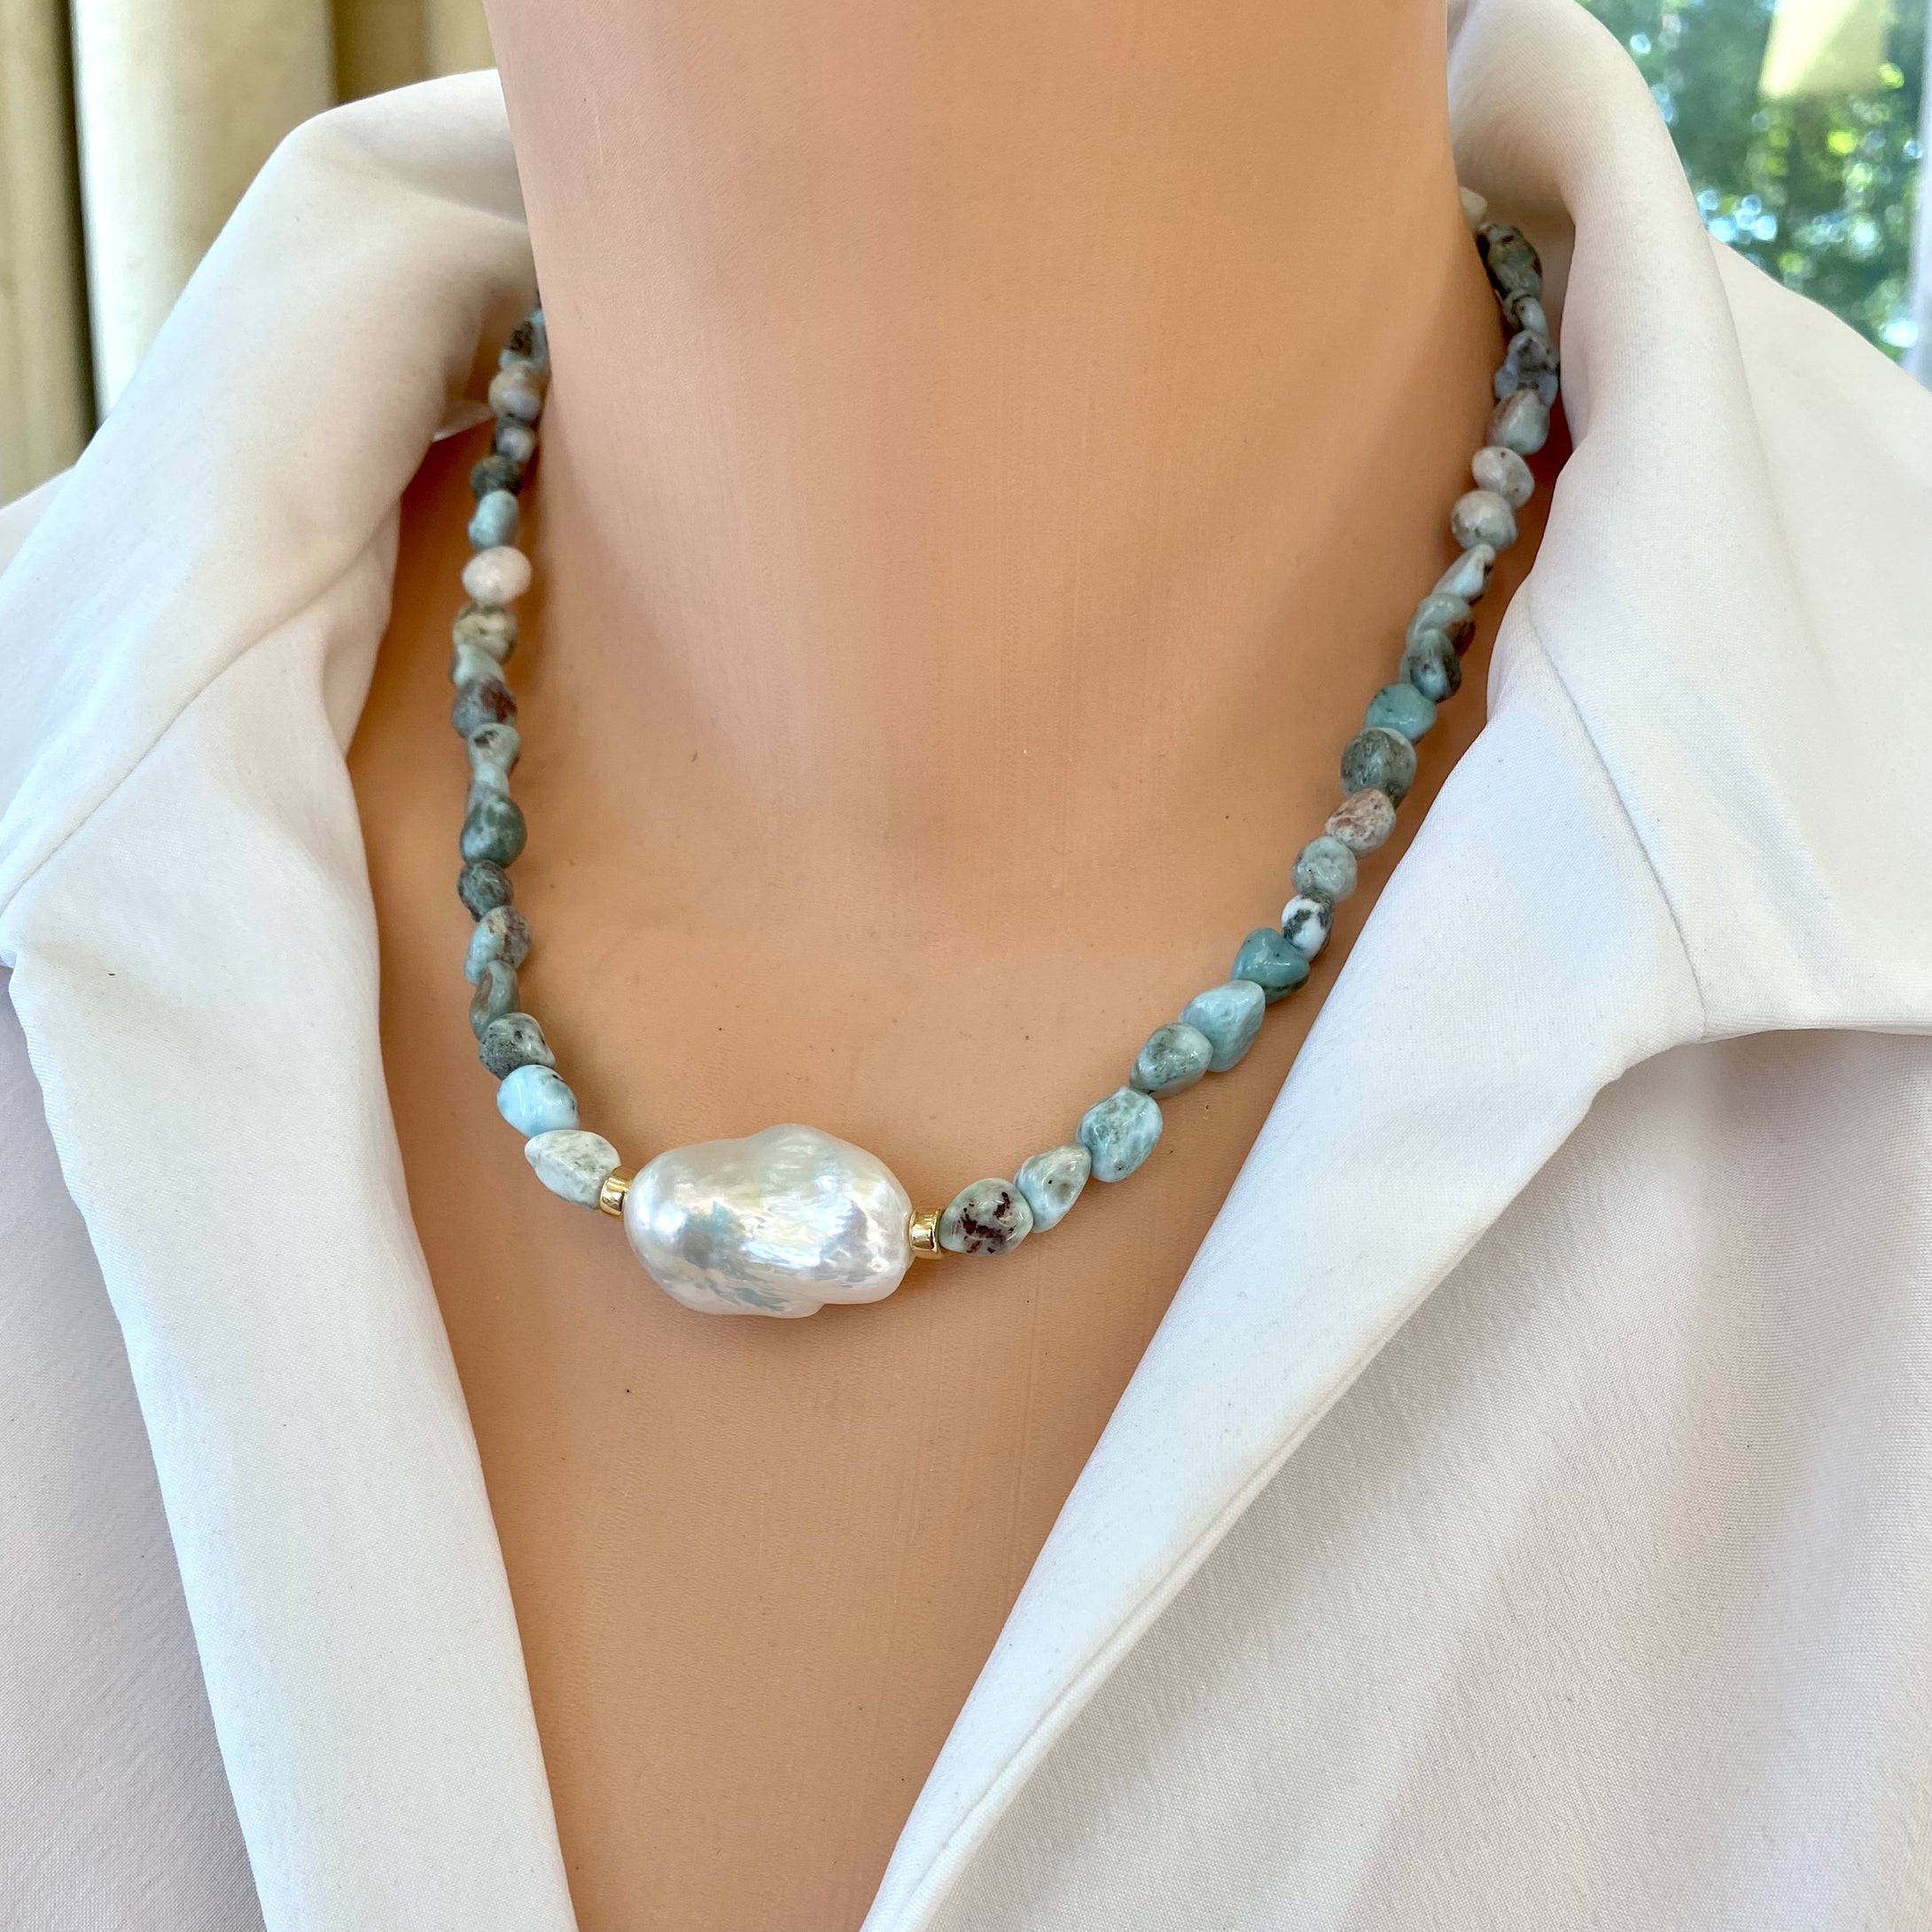 Ocean Blue Larimar and Baroque Pearl Necklace with Gold Filled Beads and Closure,18